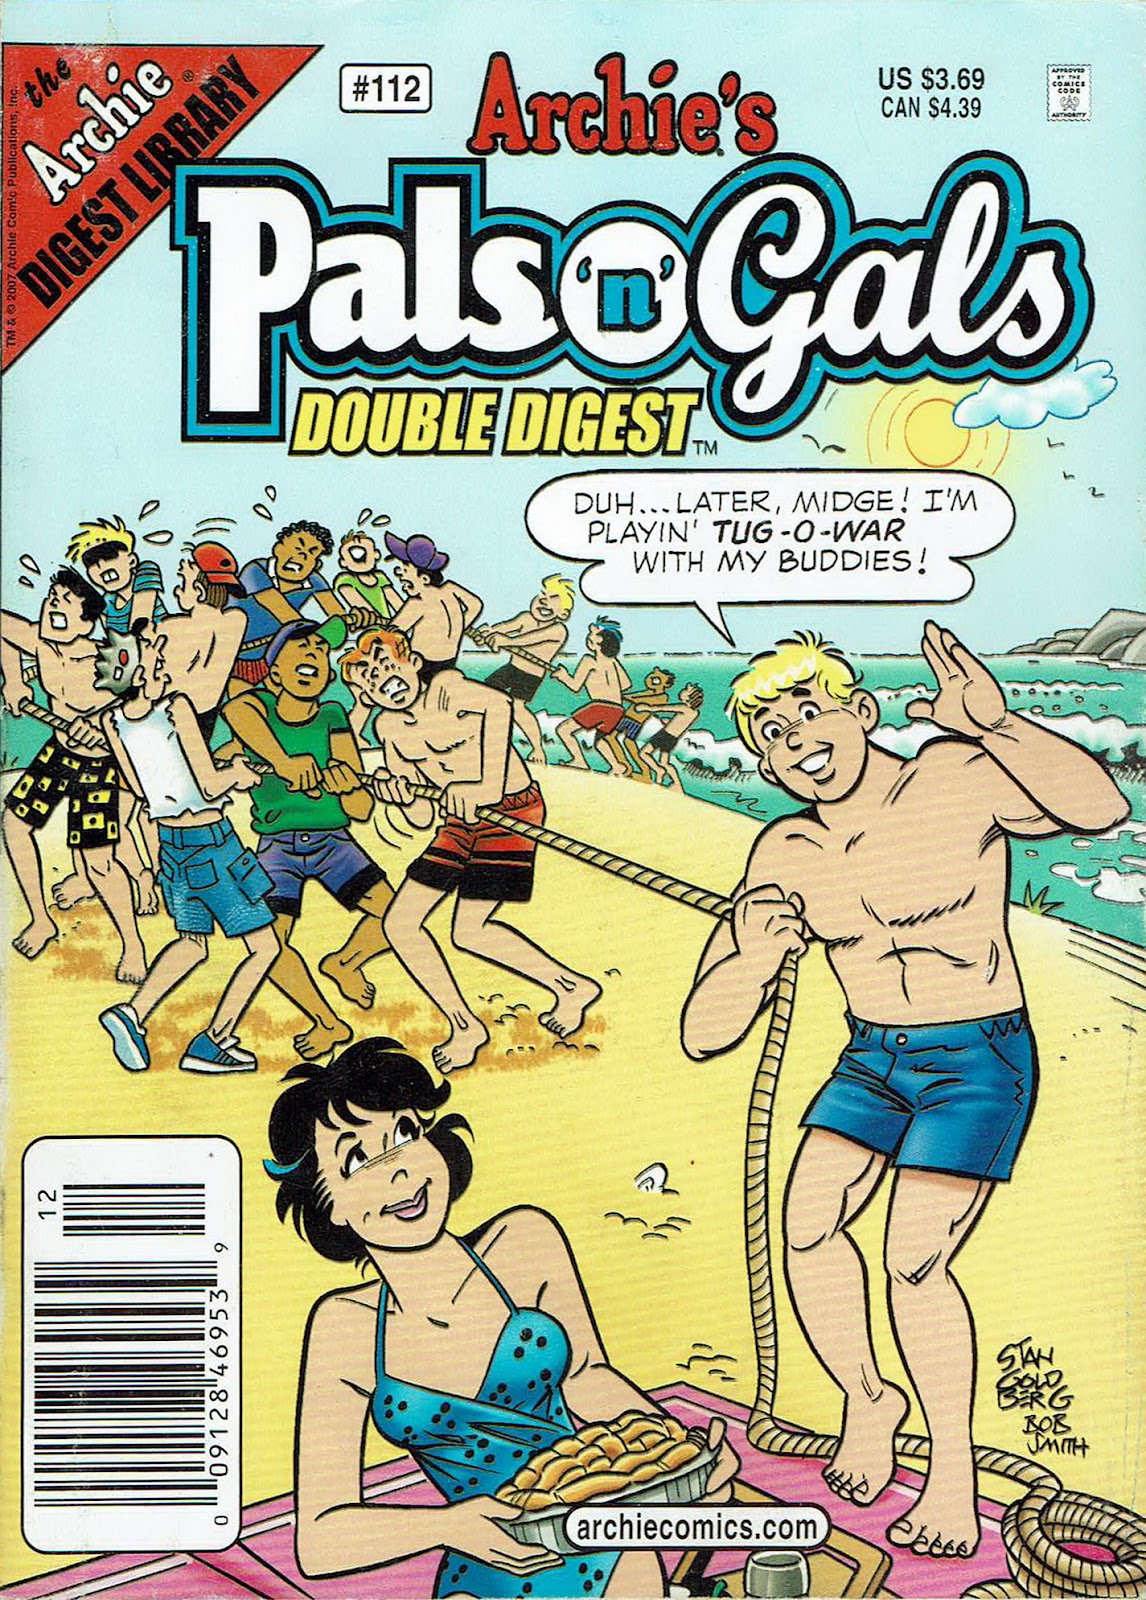 Archie's Pals 'n' Gals Double Digest Magazine issue 112 - Page 1